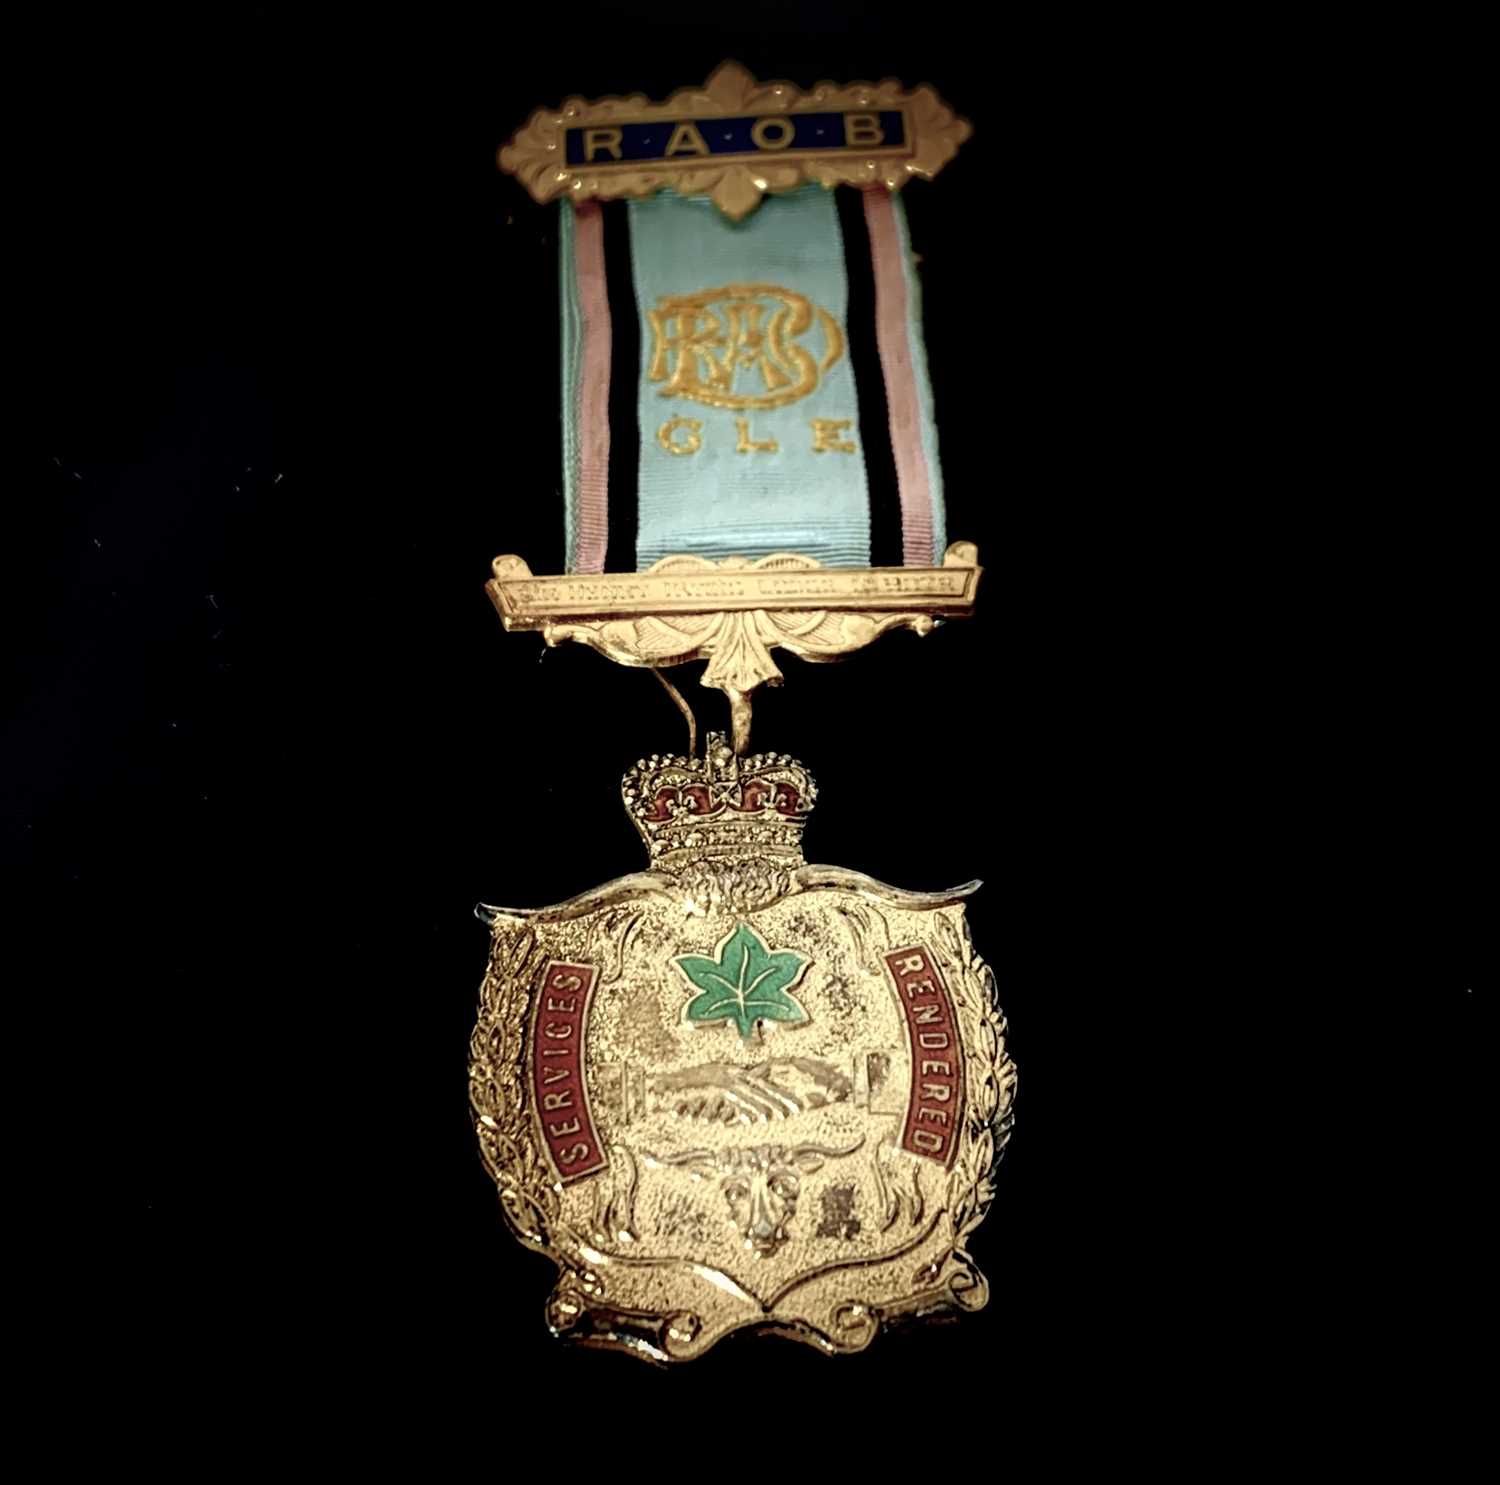 RAOB Medals - group of 5 to G.Ware 1960's - 1990's, 4 silver Sir Henry Irvine Lodge. - Image 16 of 16